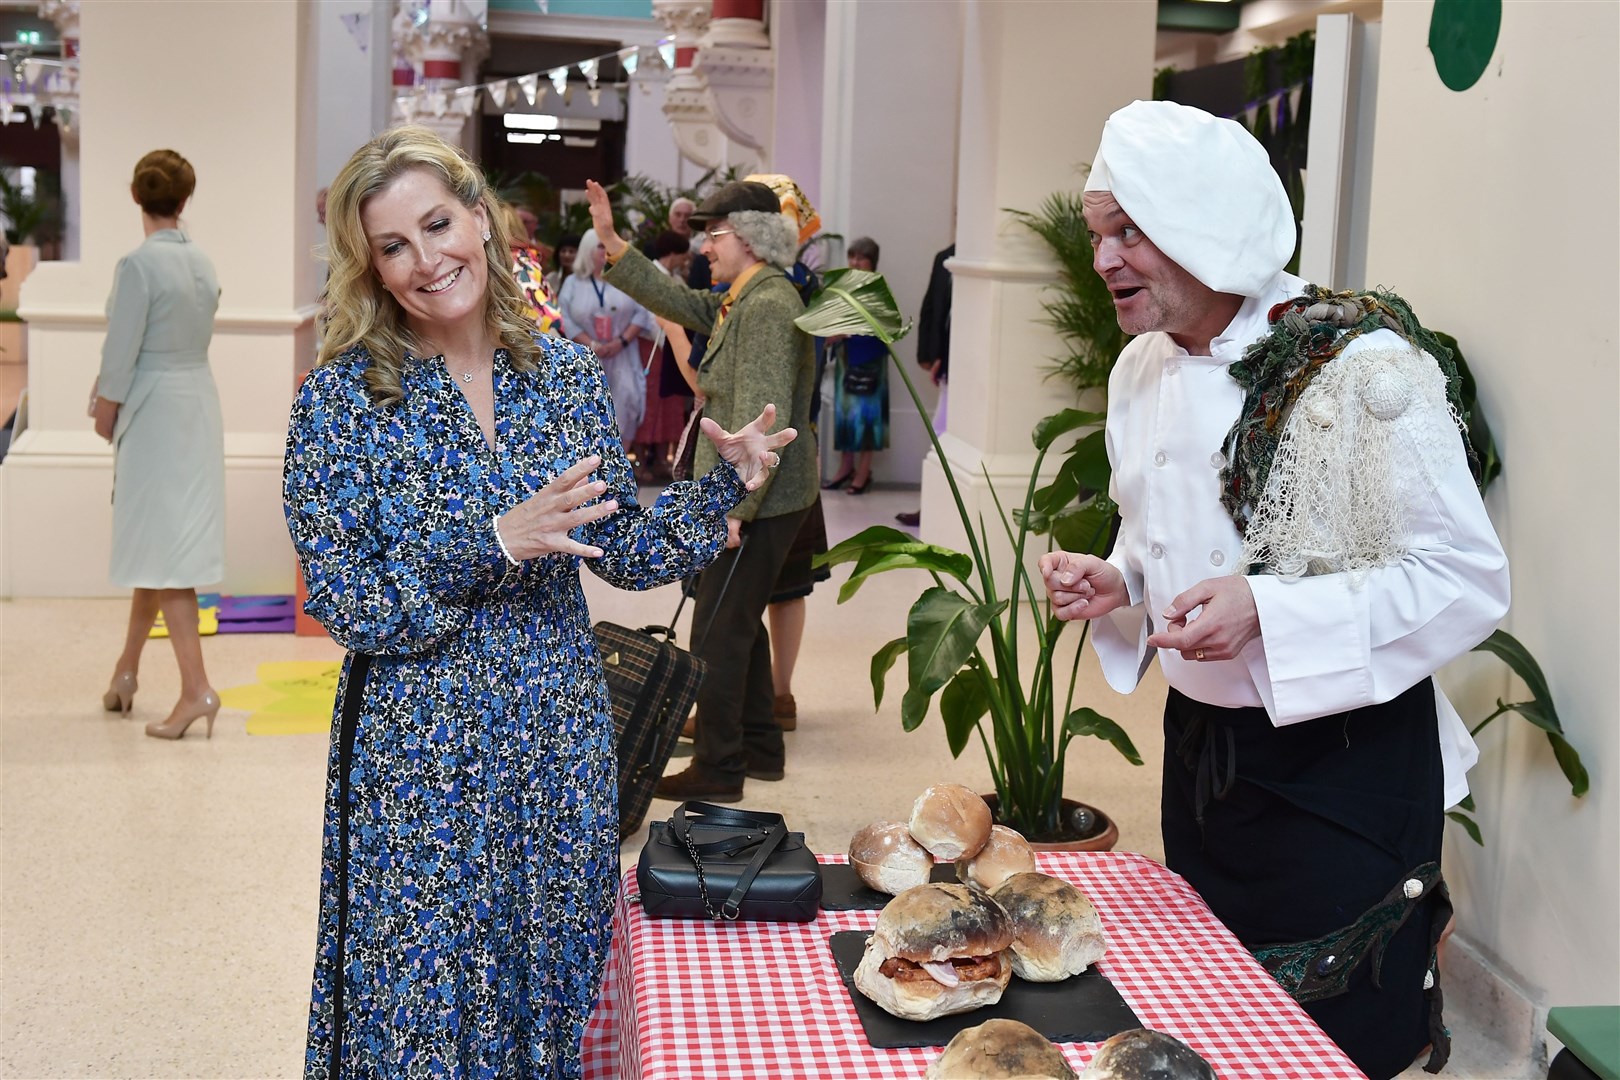 The Countess of Wessex was tempted with local produce by an enthusiastic chef at one event (Charles McQuillan/PA)